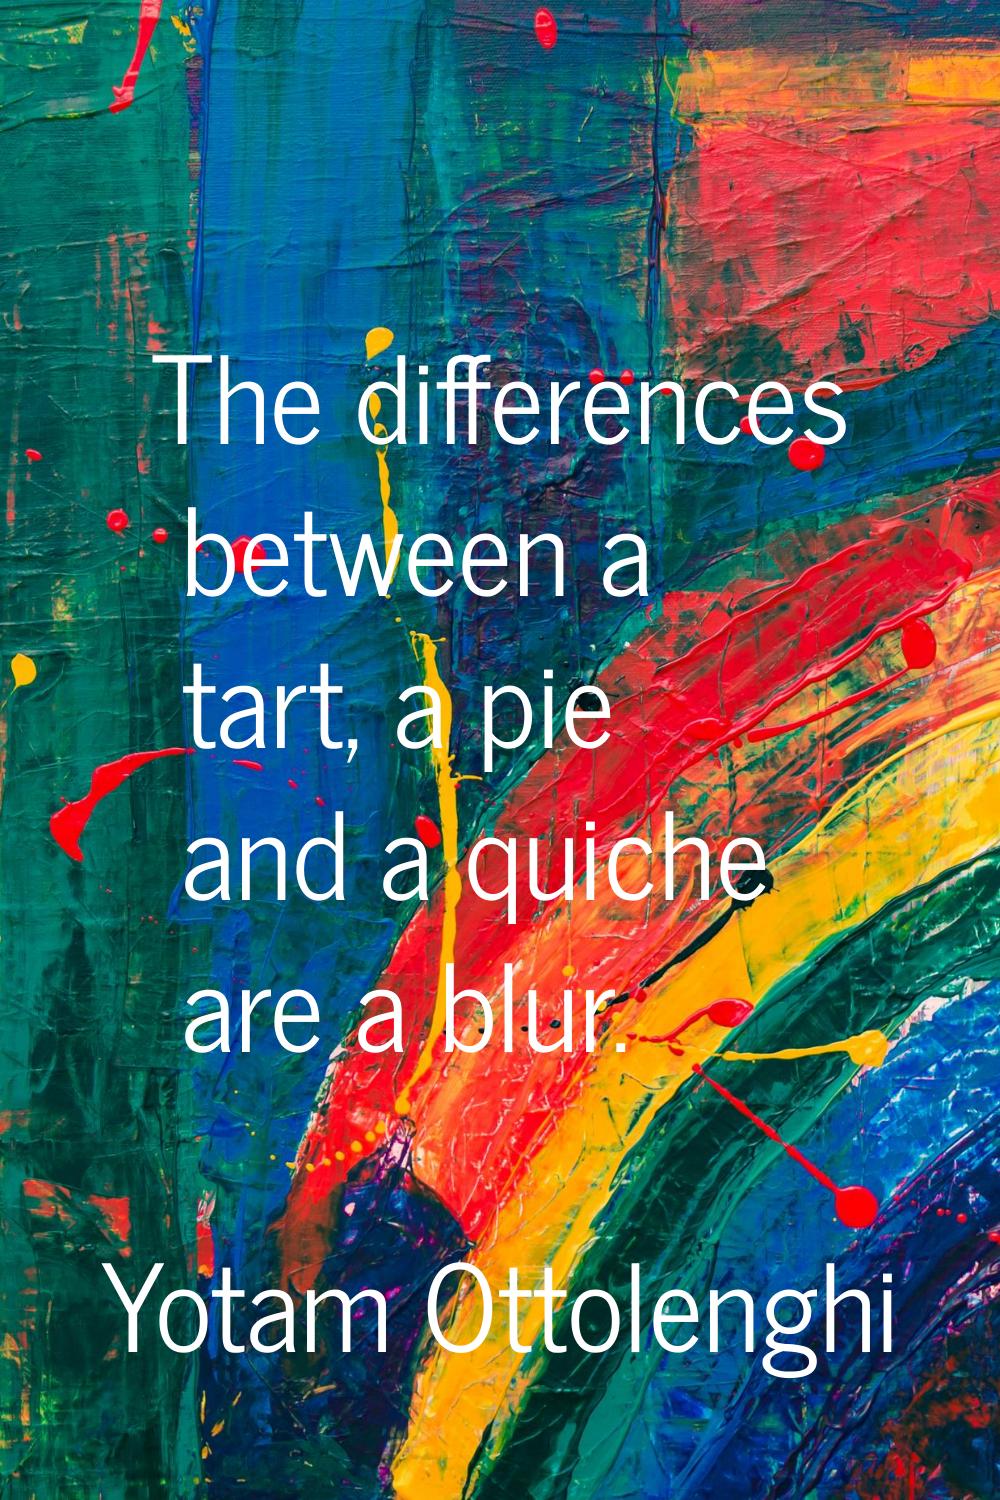 The differences between a tart, a pie and a quiche are a blur.